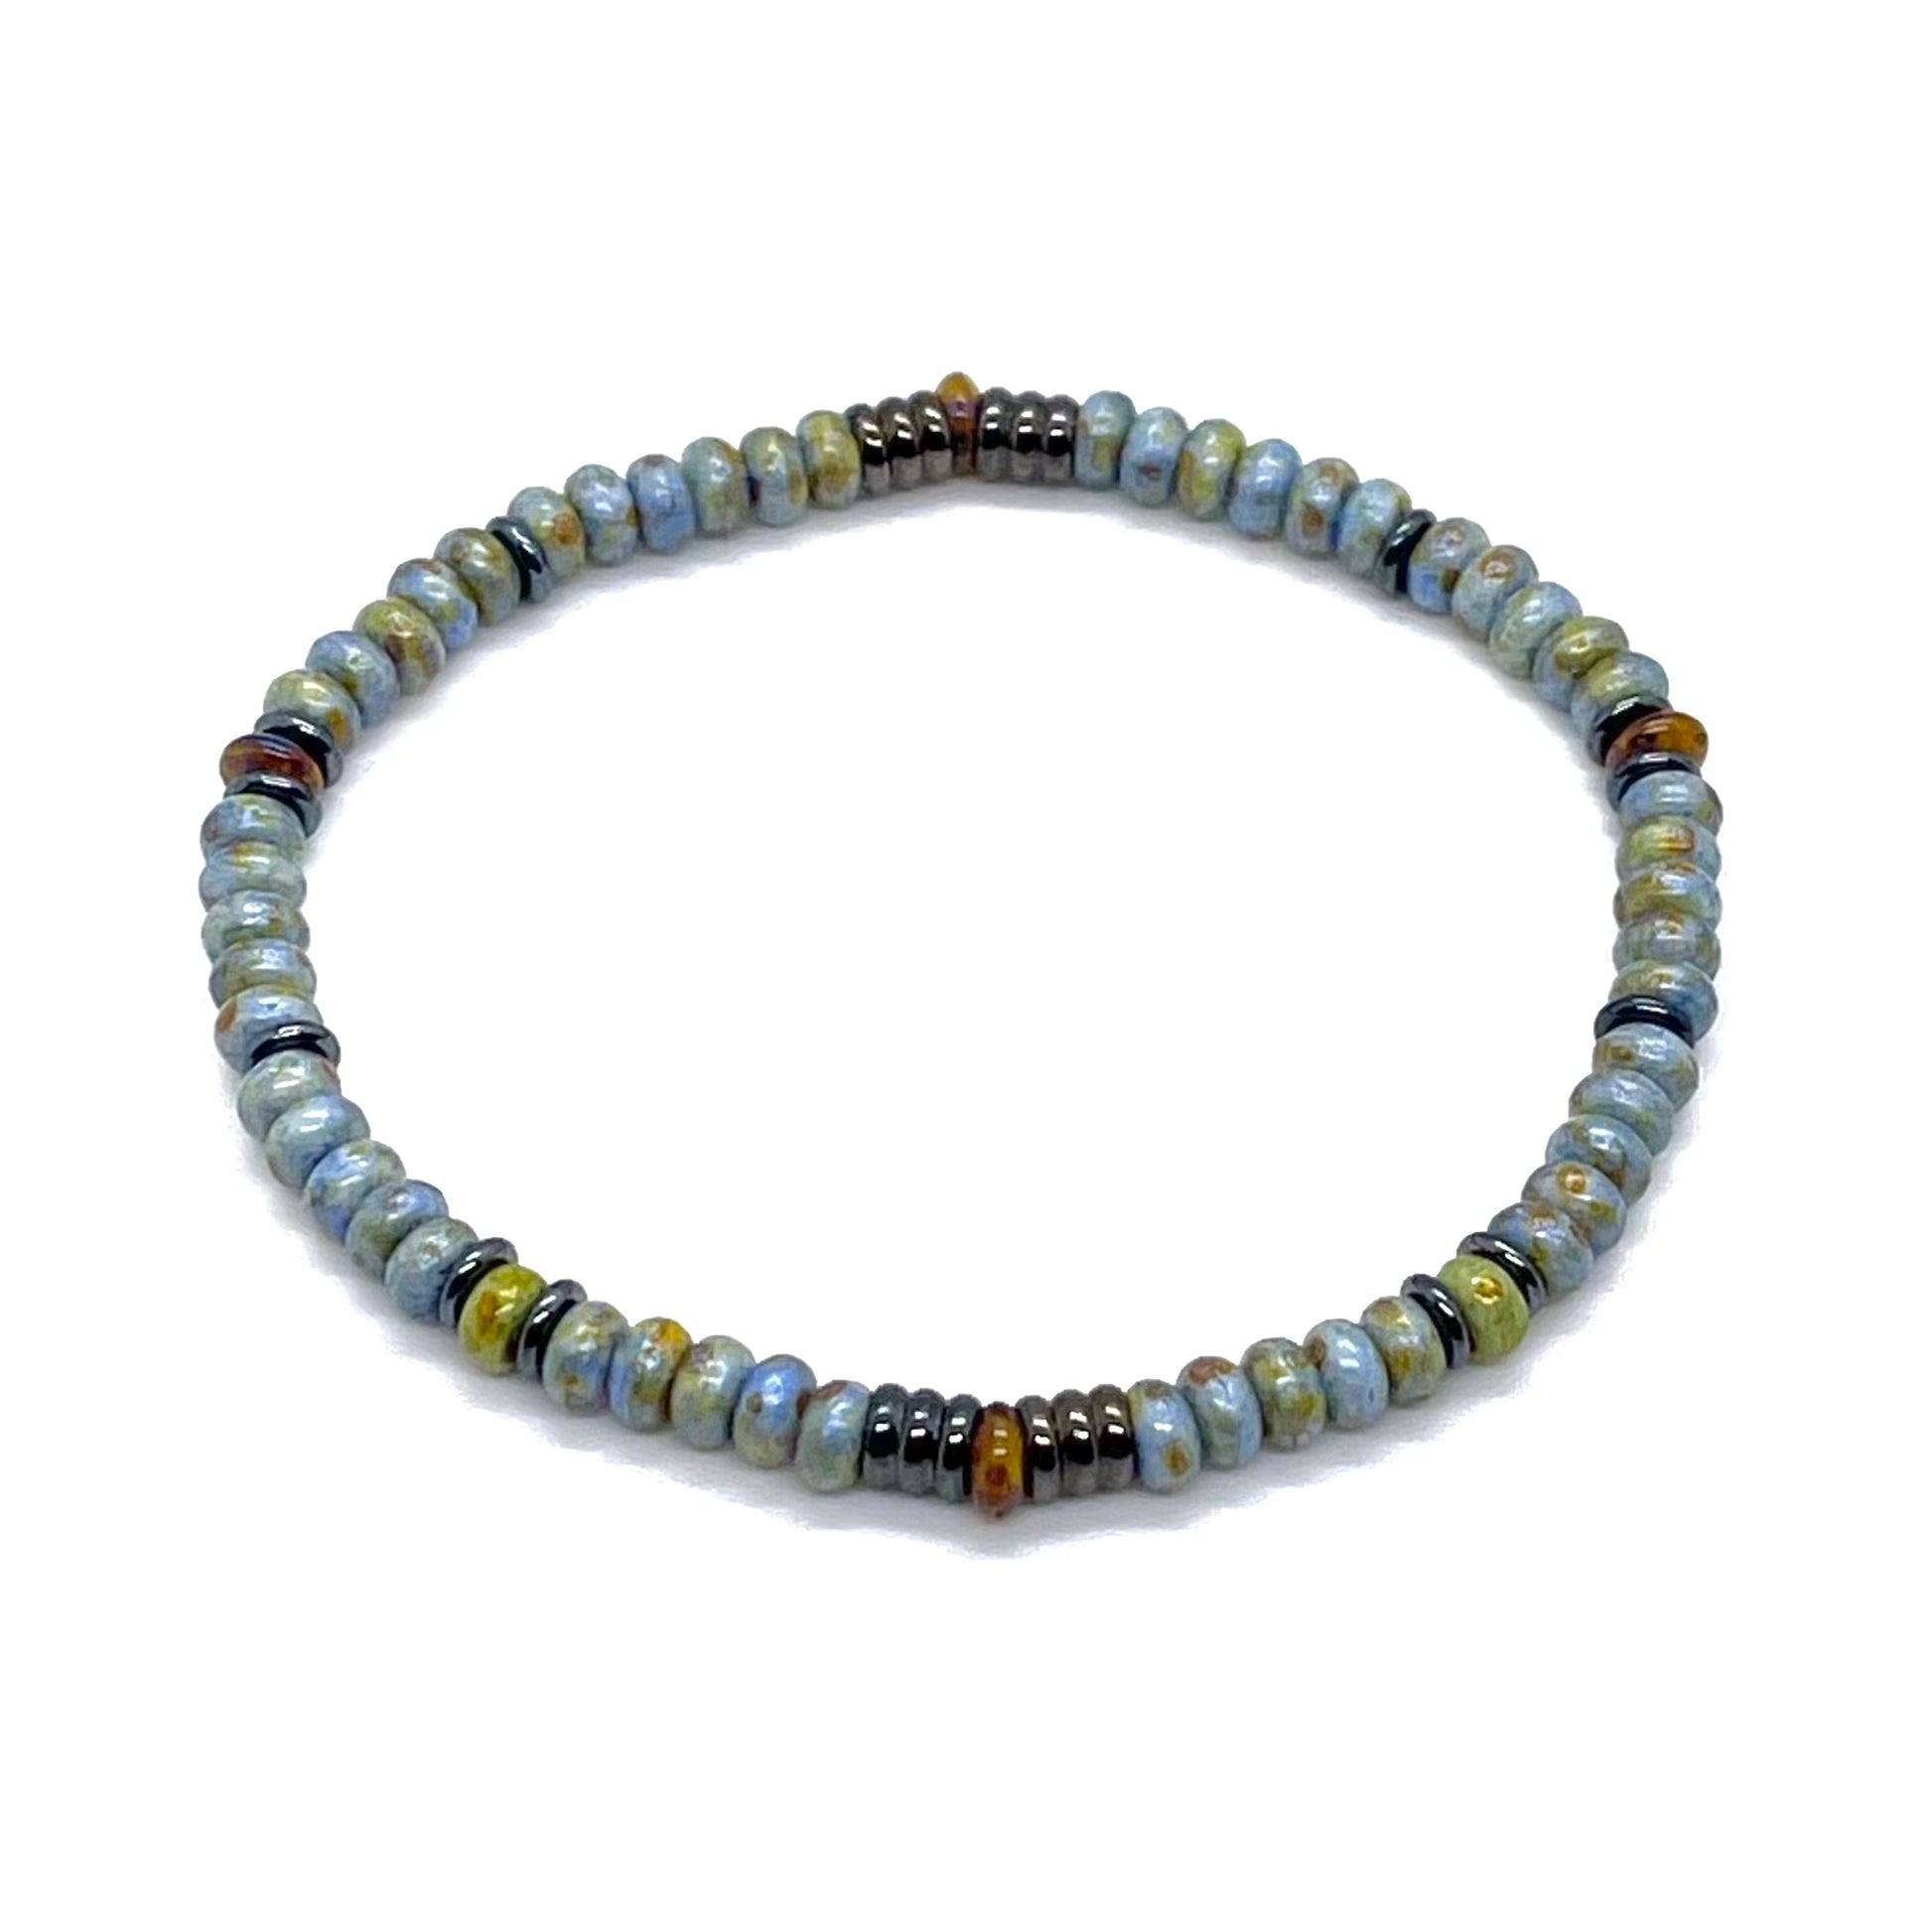 Mens speckled seed bead bracelet with blue, green, and brown beads and gunmetal accents on elastic stretch cord.